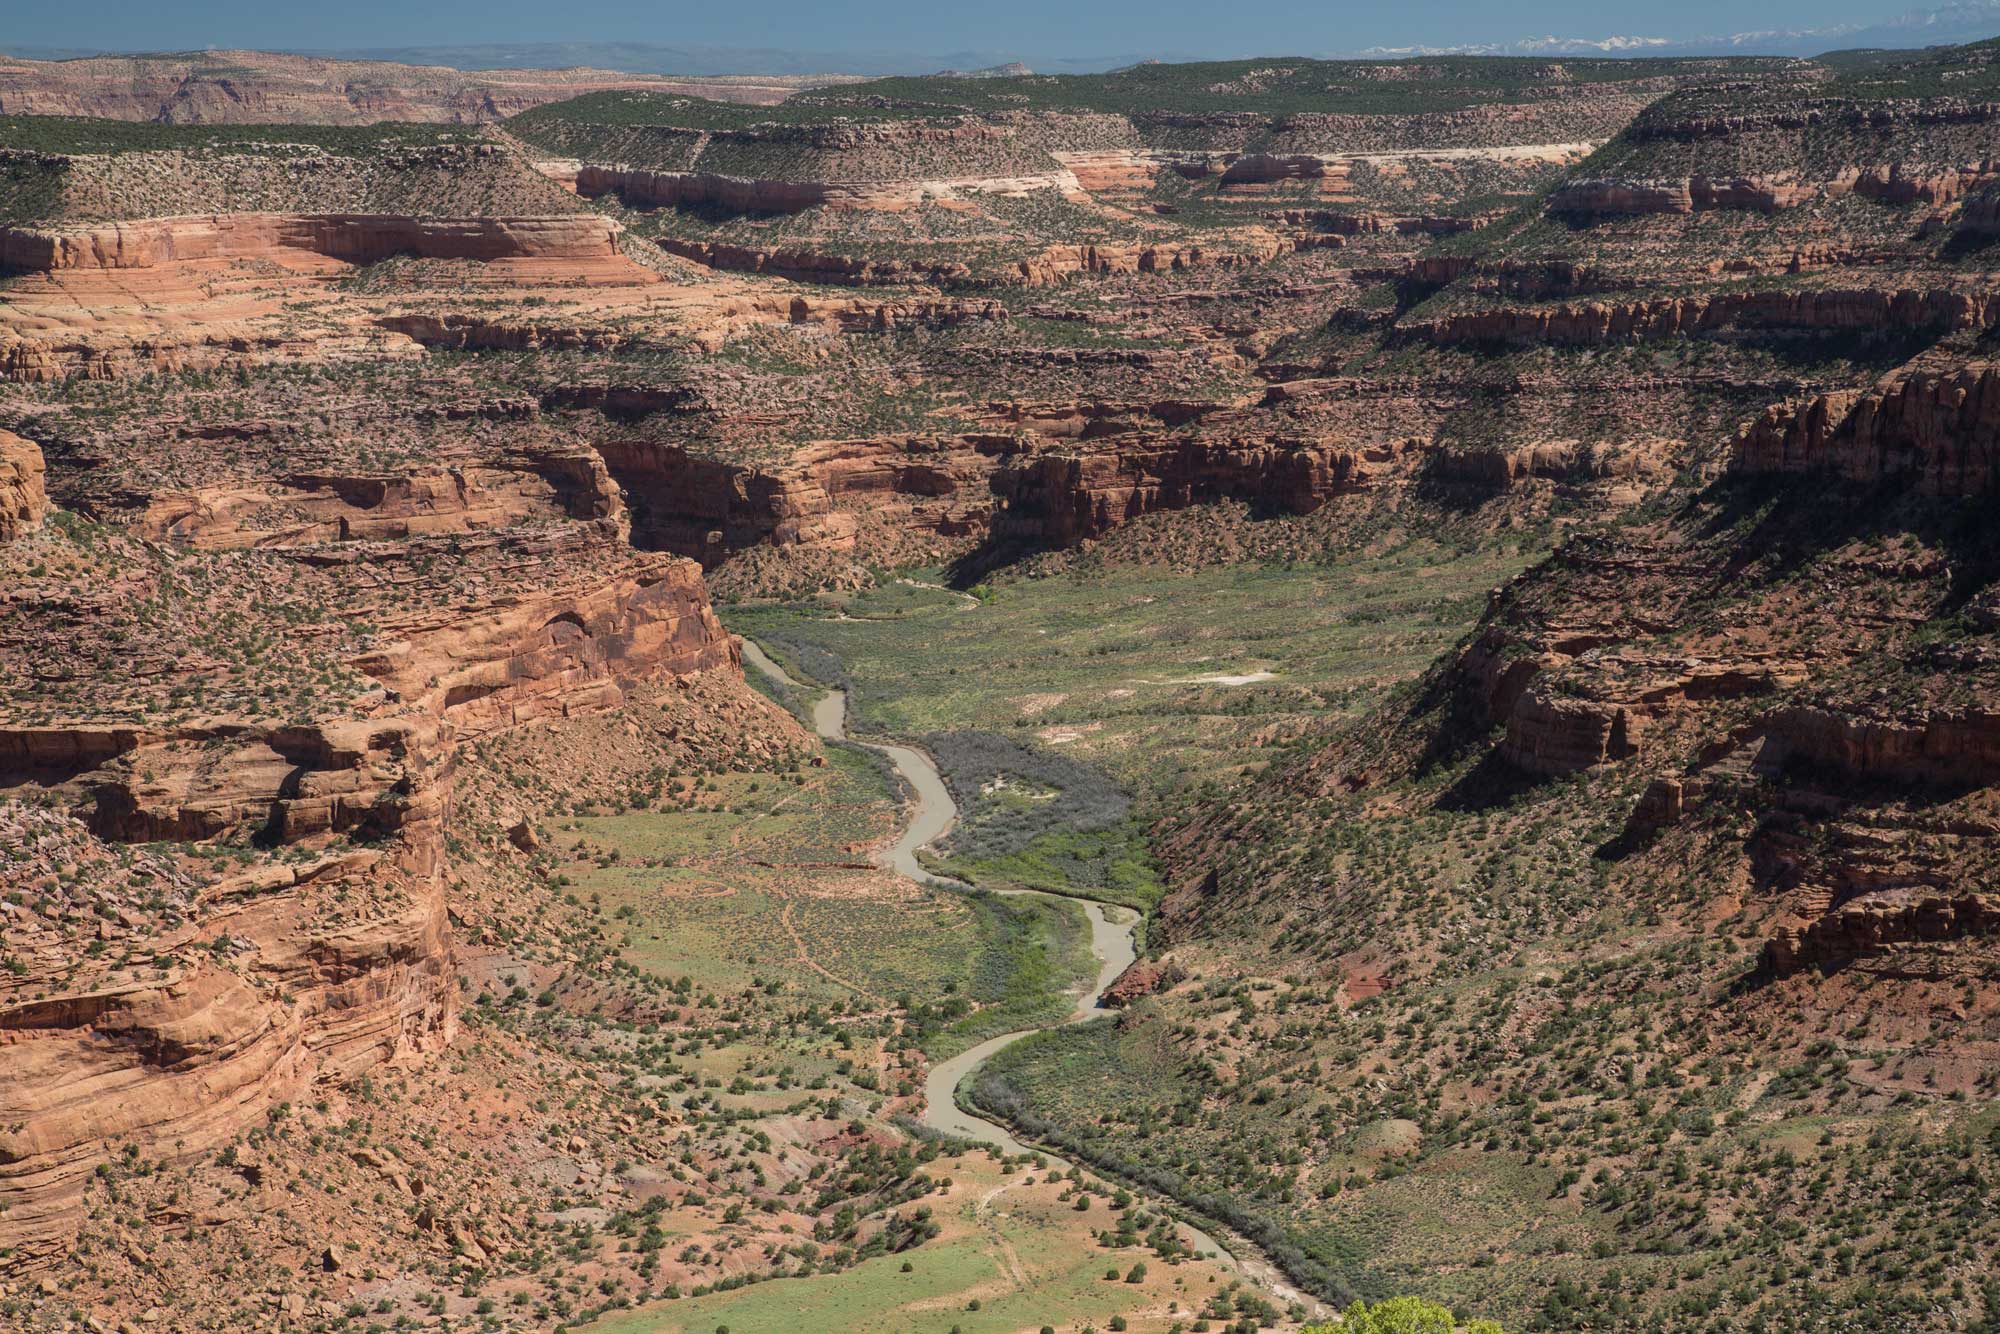 Photograph of the Dolores River snaking through a canyon with red rock cliffs. Vegetation appears low and scrubby.